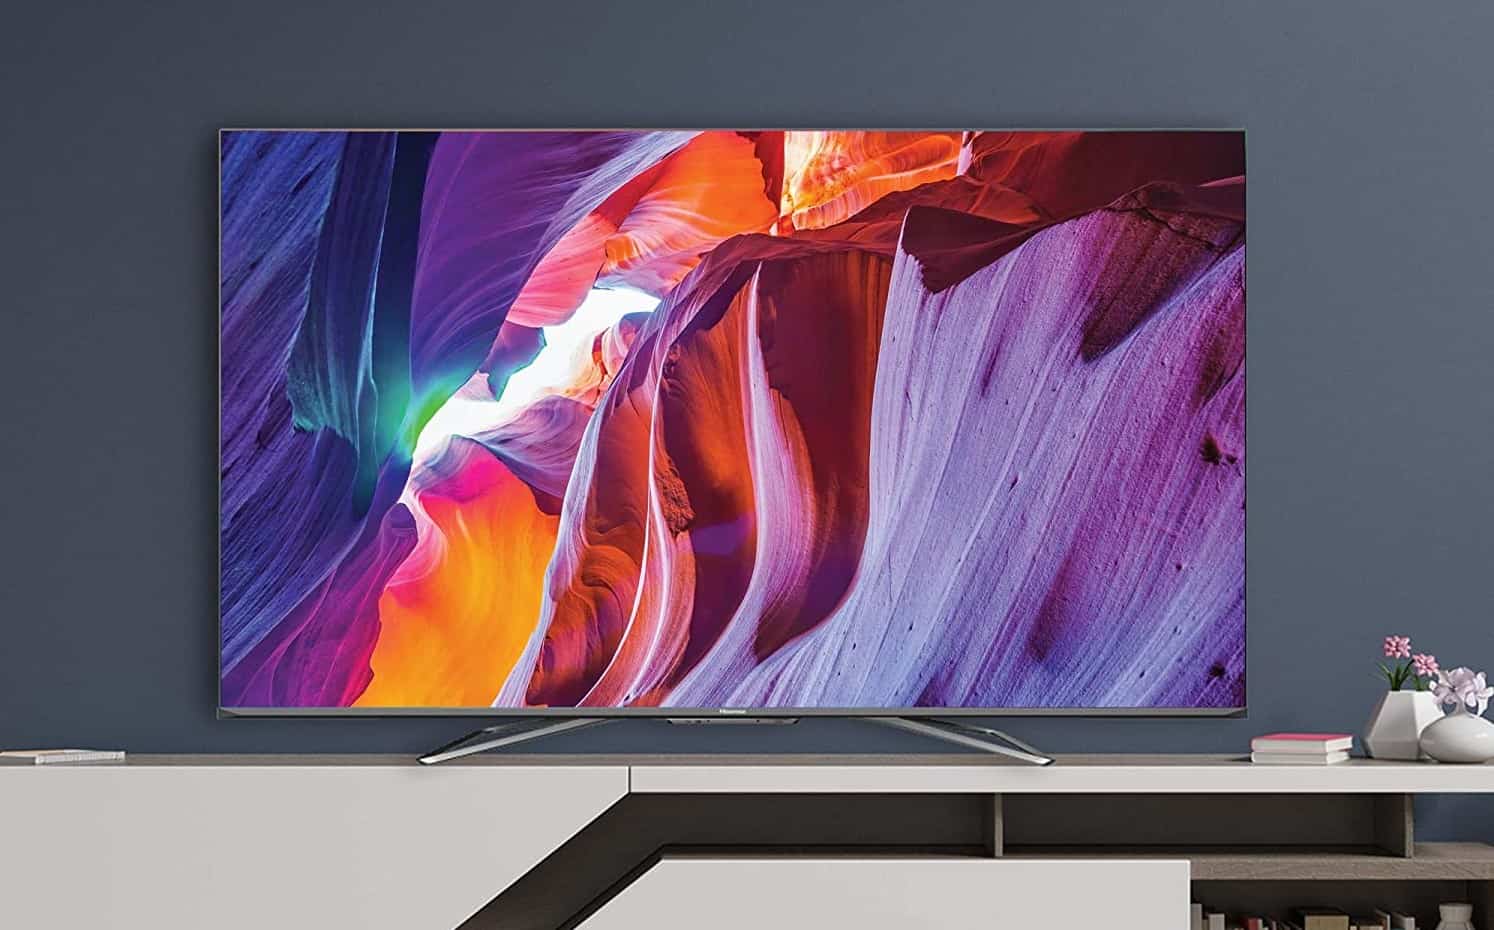 Best Hisense TV 2023 TopRated Televisions From Hisense